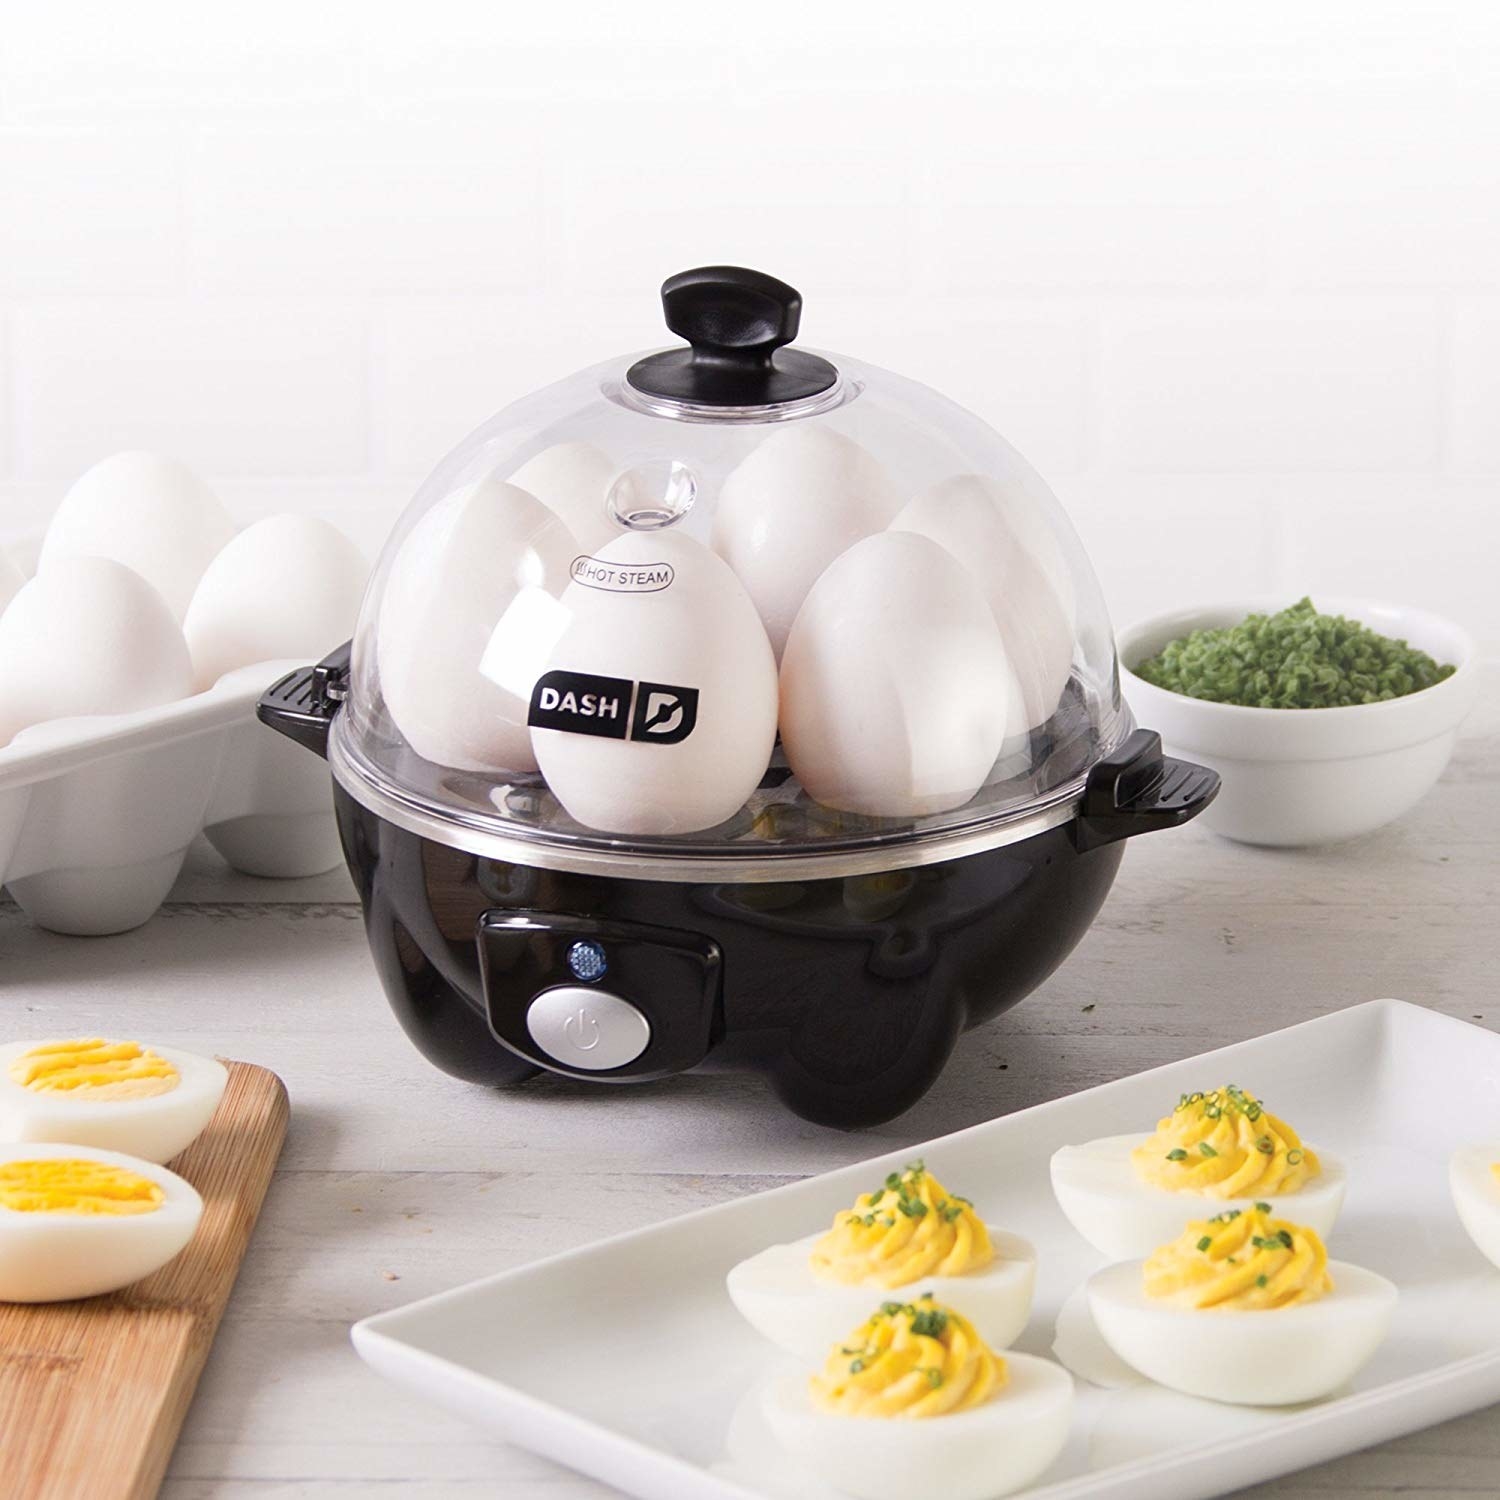 The black egg cooker with deviled eggs